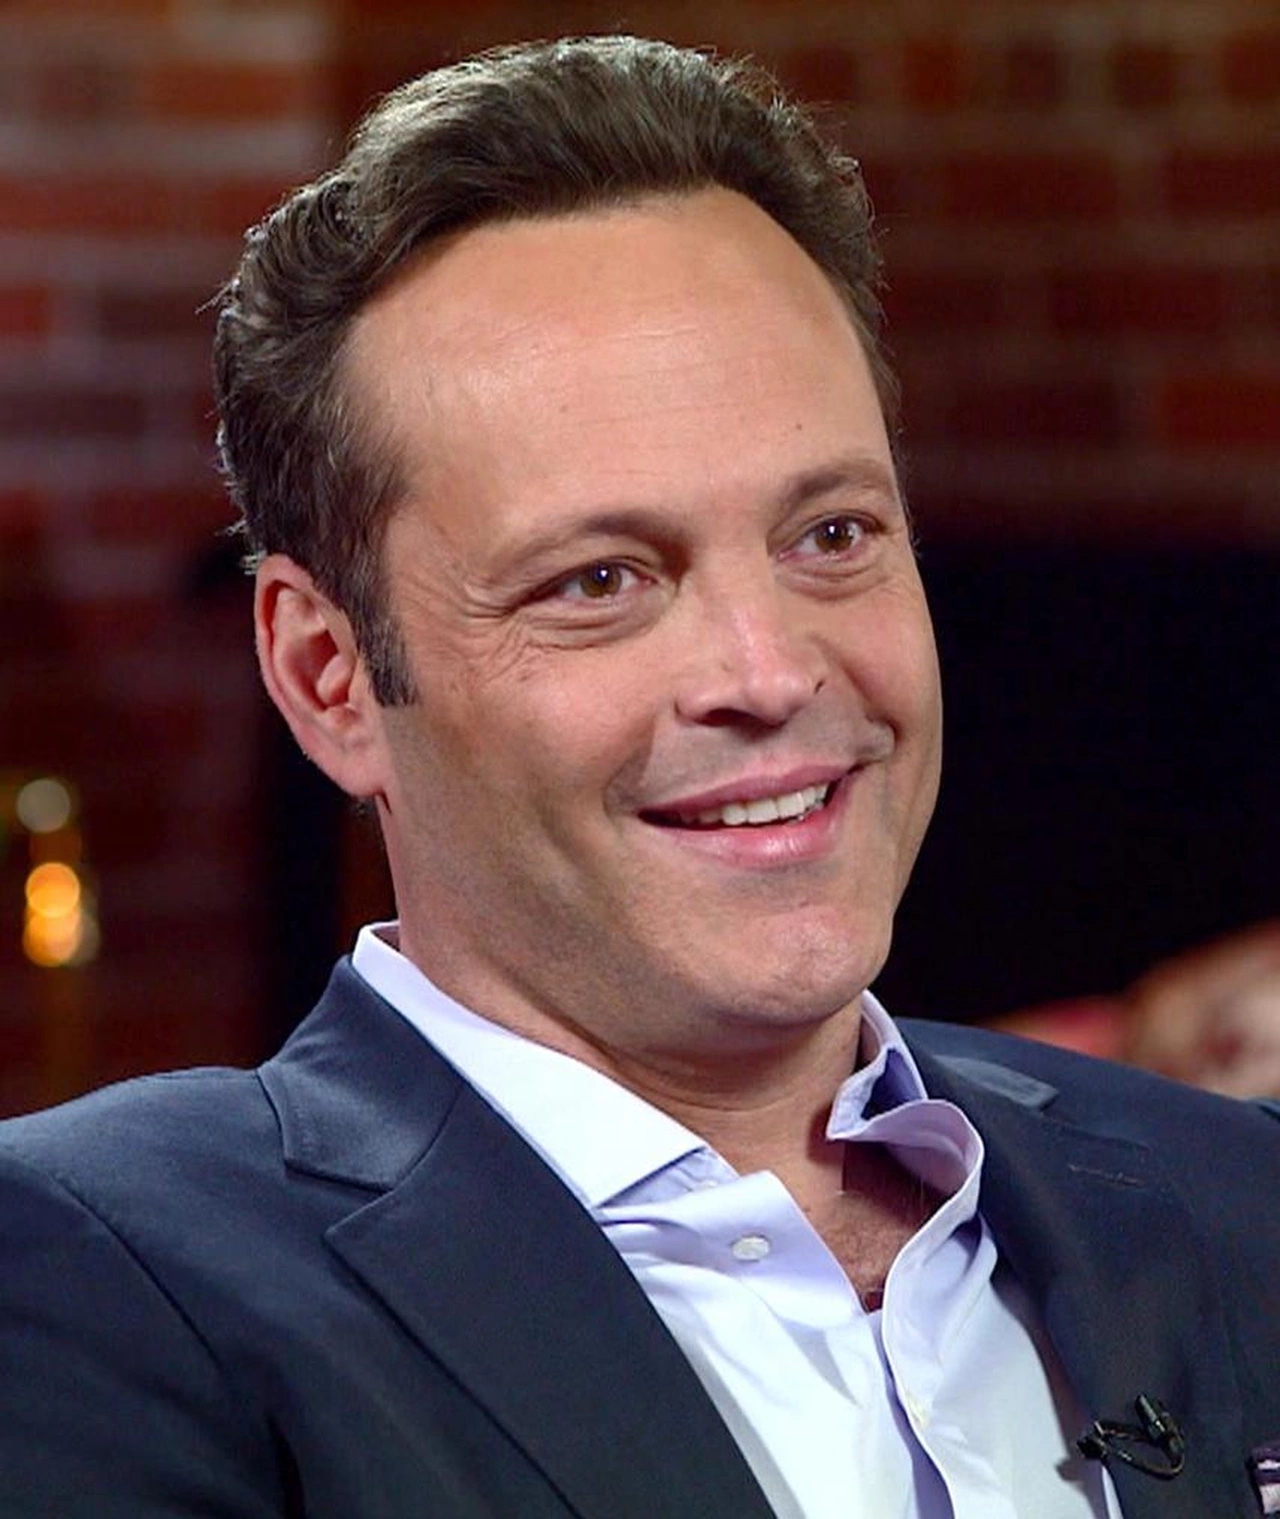 Vince Vaughn Movies - A Diverse And Entertaining Filmography